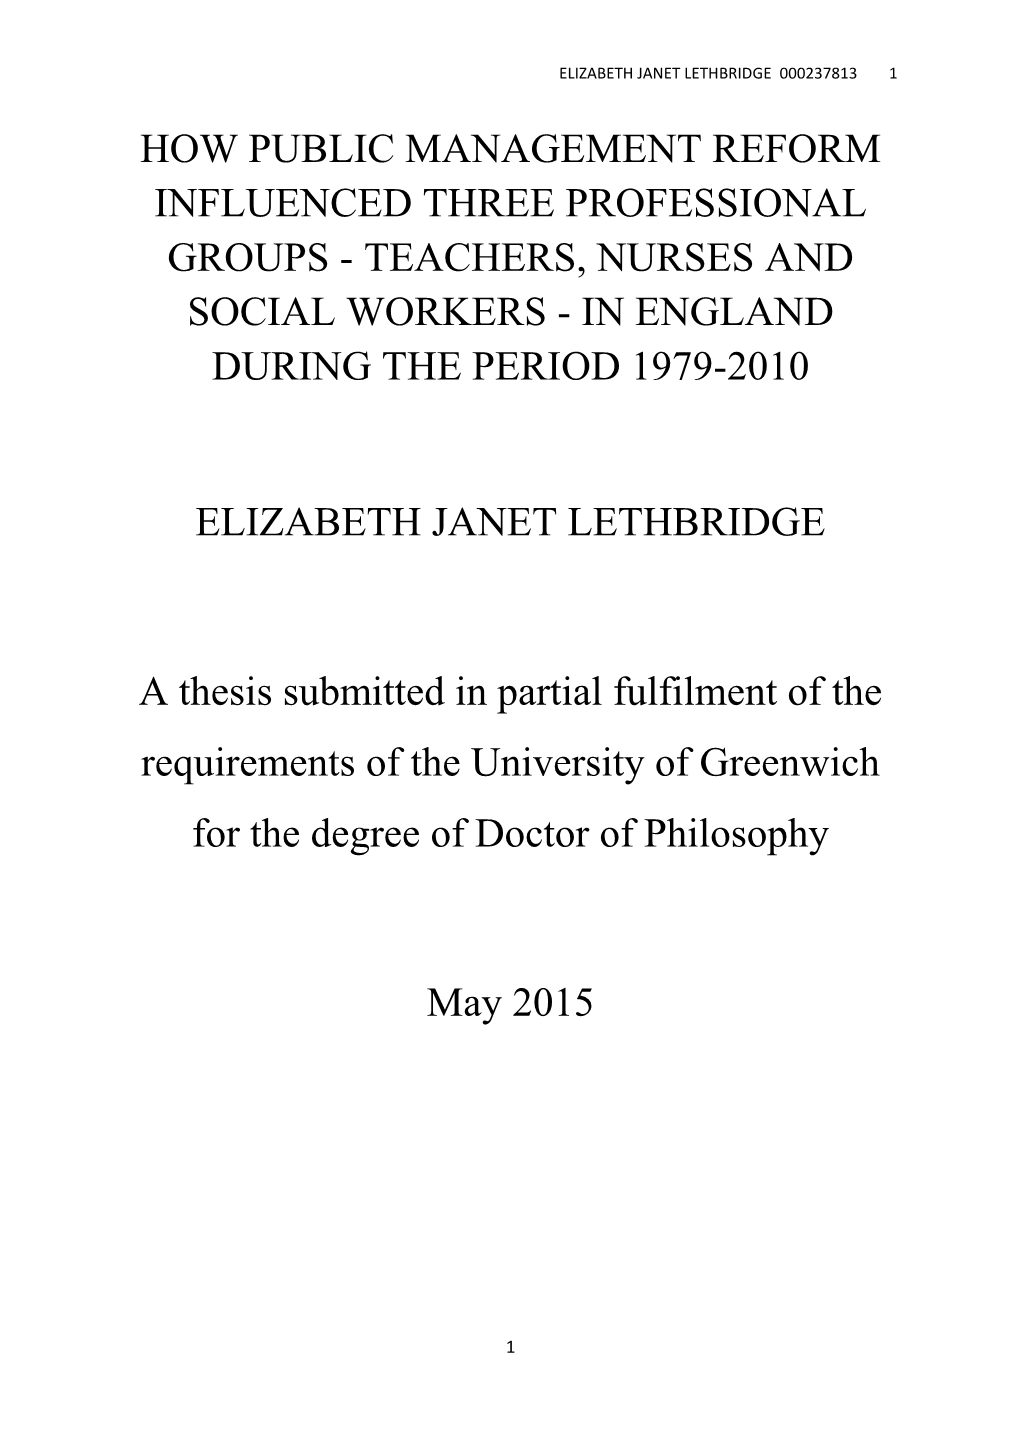 Teachers, Nurses and Social Workers - in England During the Period 1979-2010